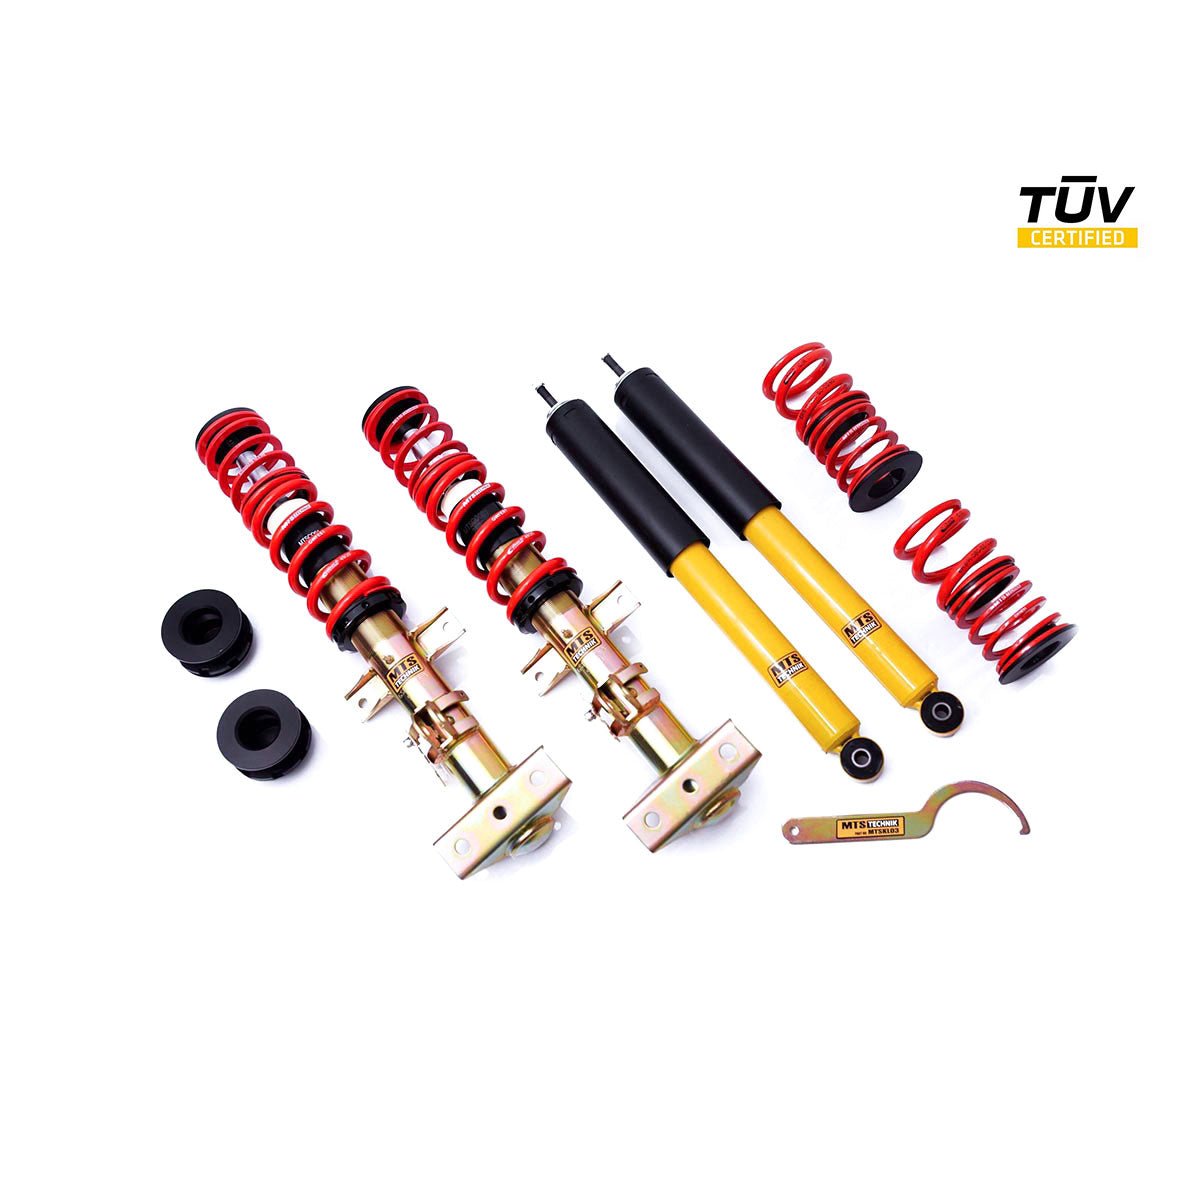 MTS TECHNIK coilover kit SPORT BMW E36 Compact (with TÜV) - PARTS33 GmbH